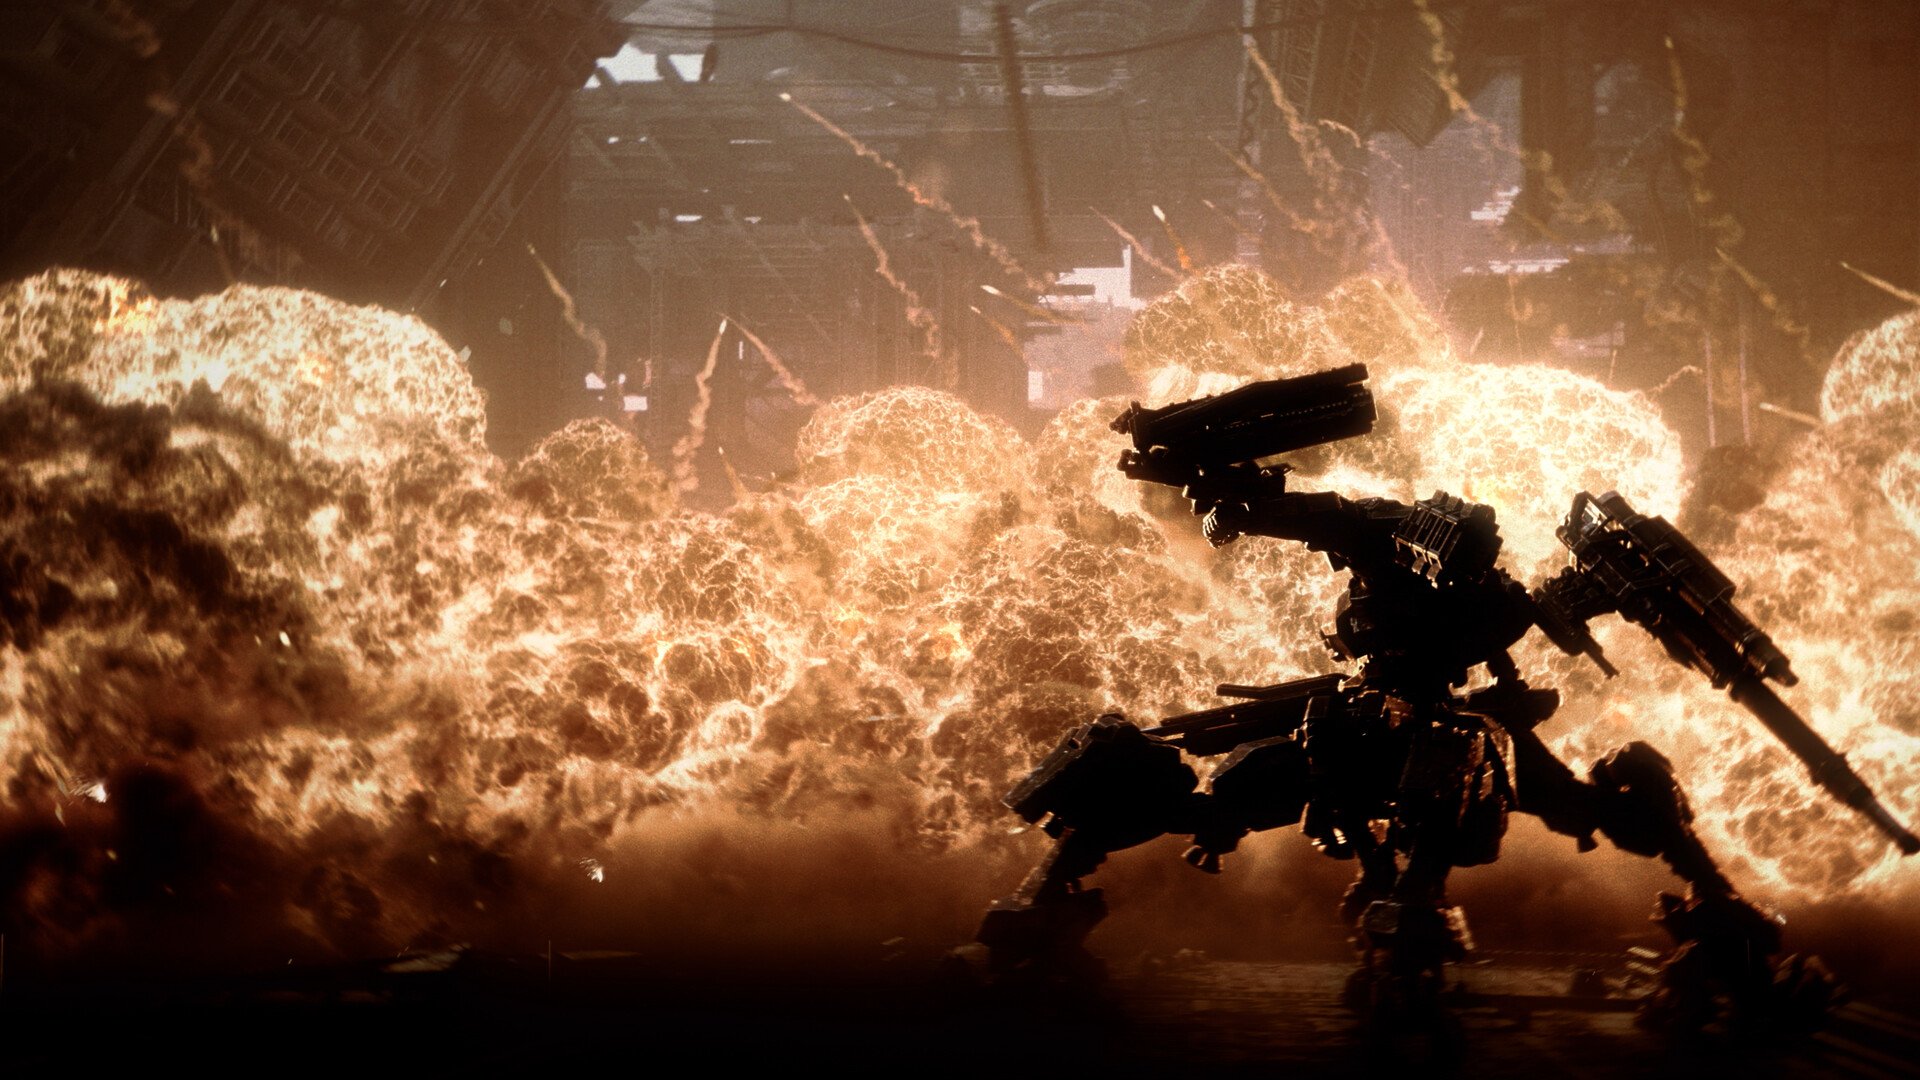 Armored Core 6 isn't Elden Ring with mechs, FromSoftware says